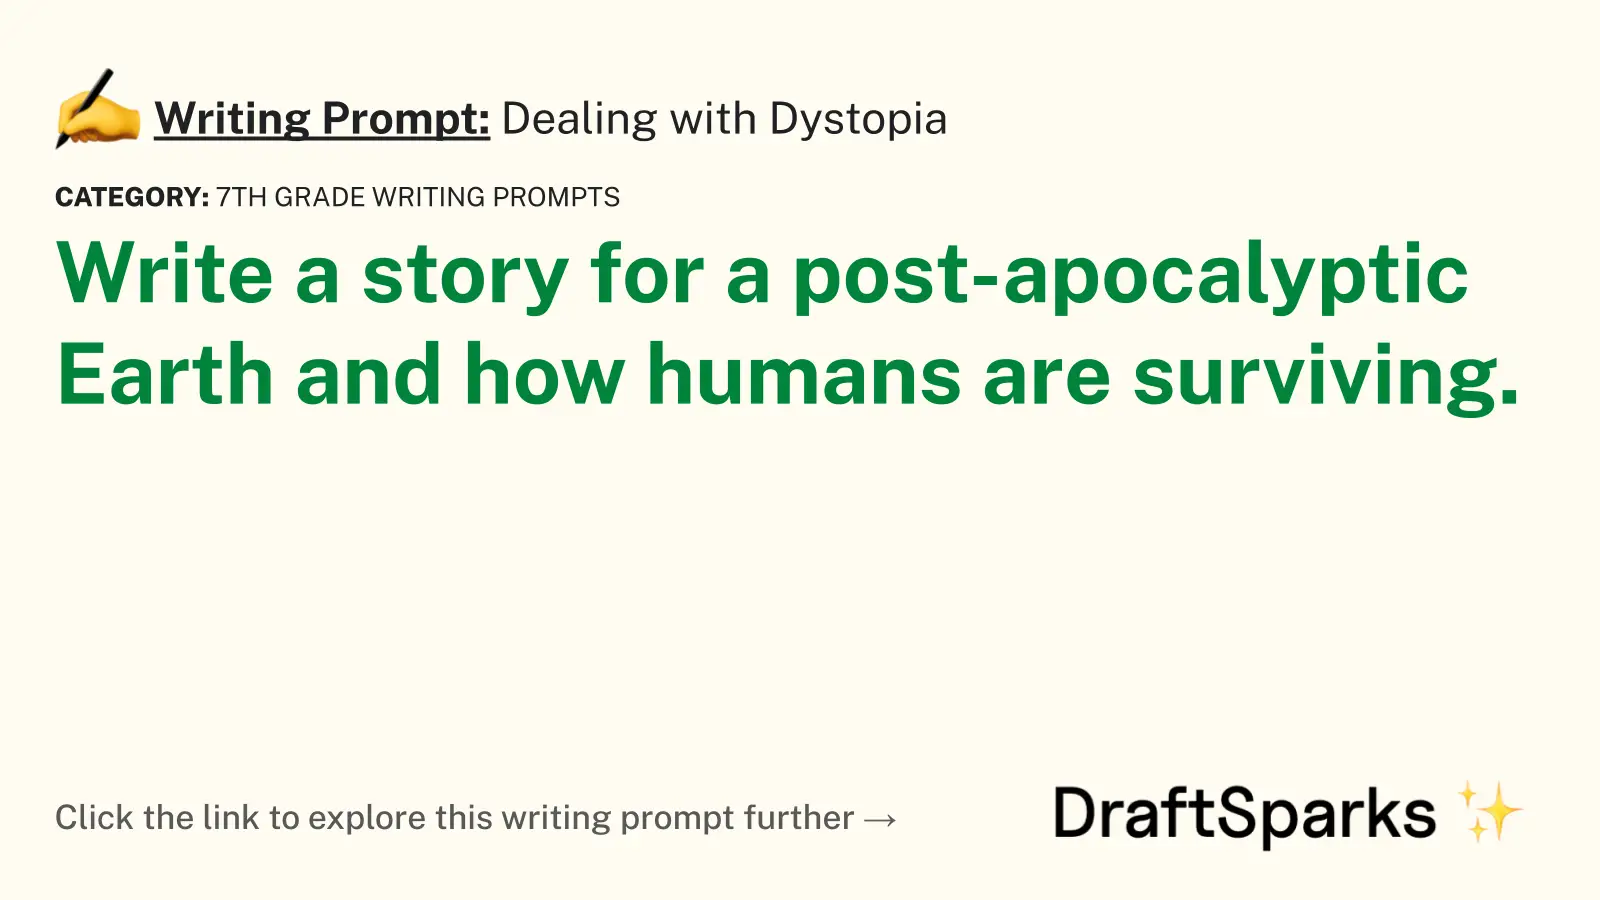 Dealing with Dystopia